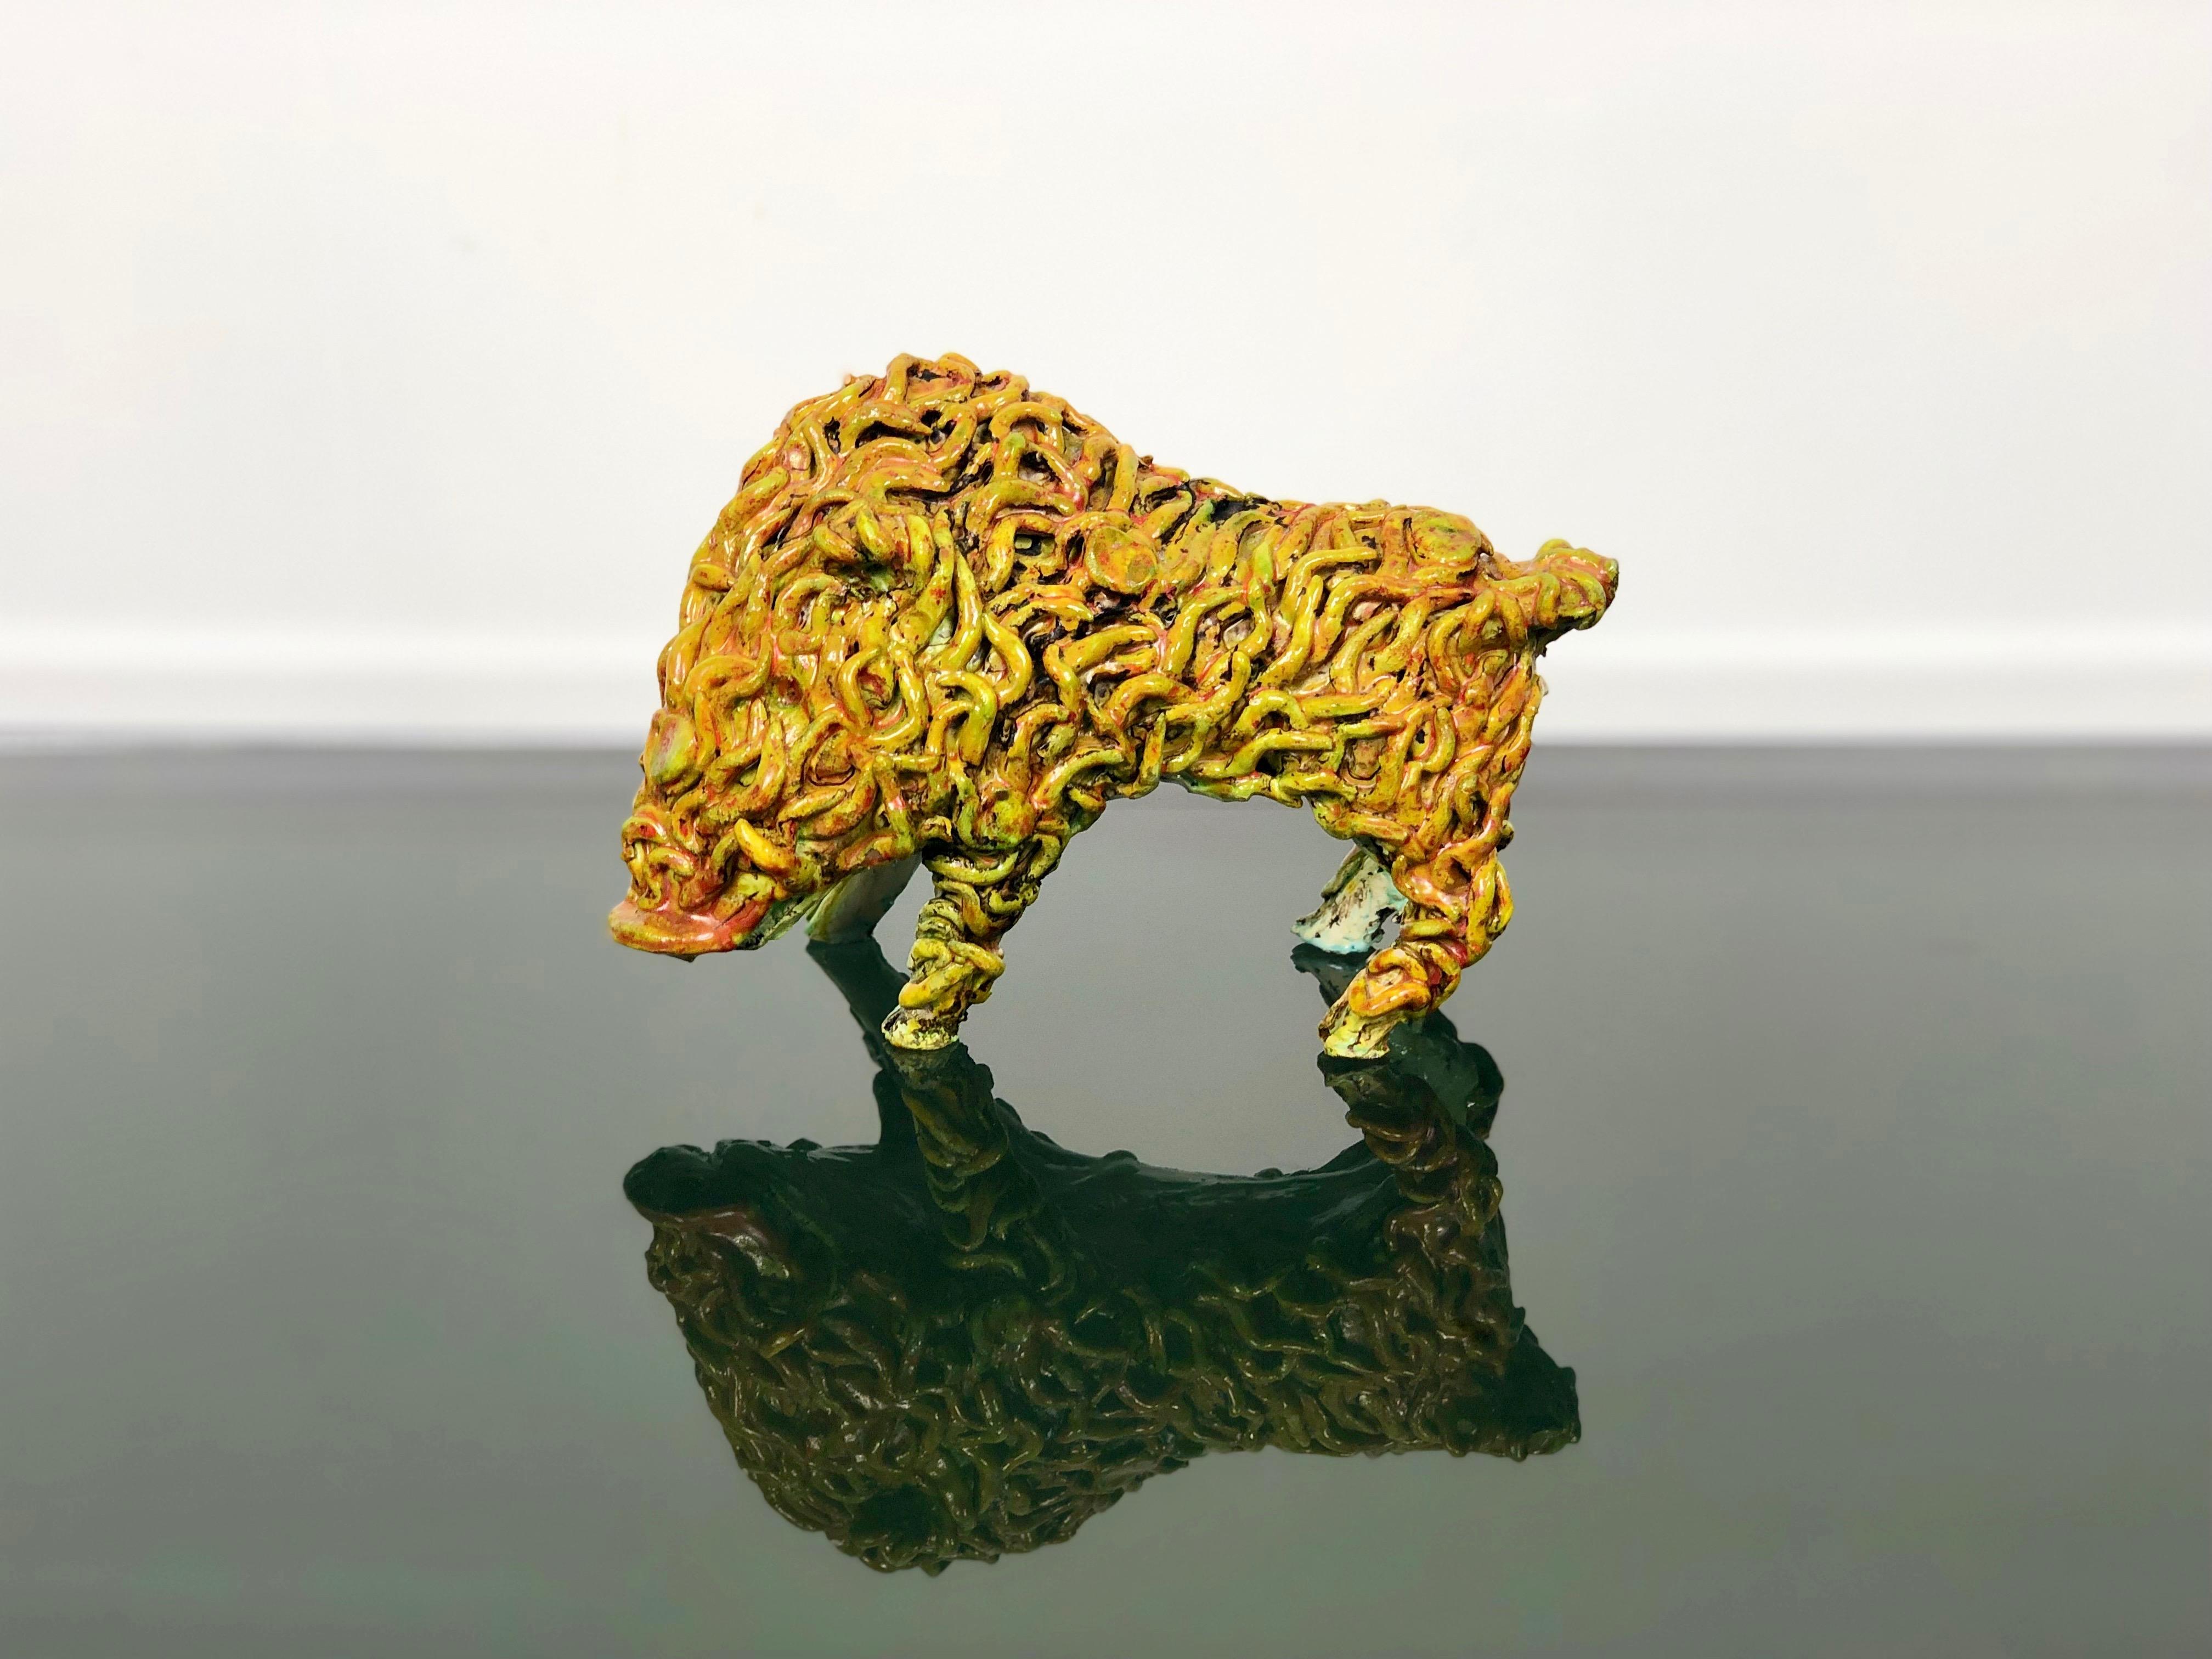 Boar sculpture by the Sardinian designer Gianluigi Mele in ceramic, Italy, circa 1970.
Signed on the bottom.